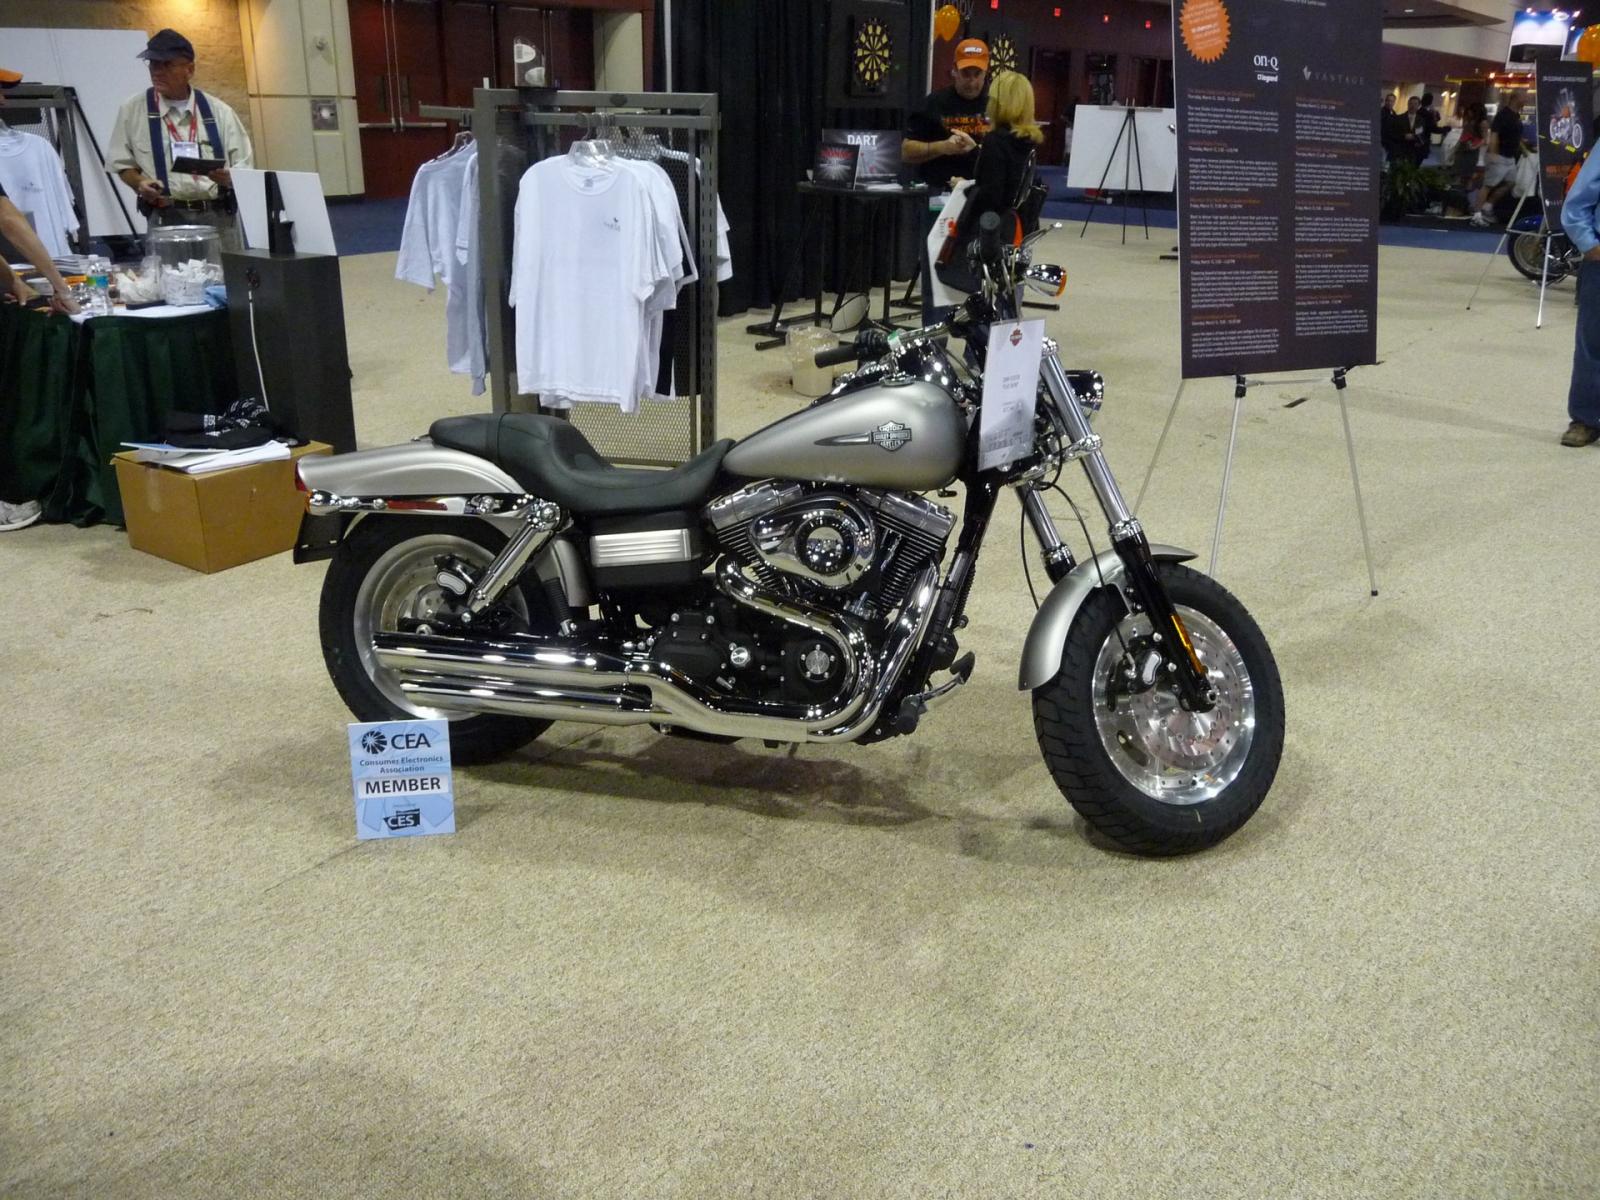 OnQ booth - Just some Harleys